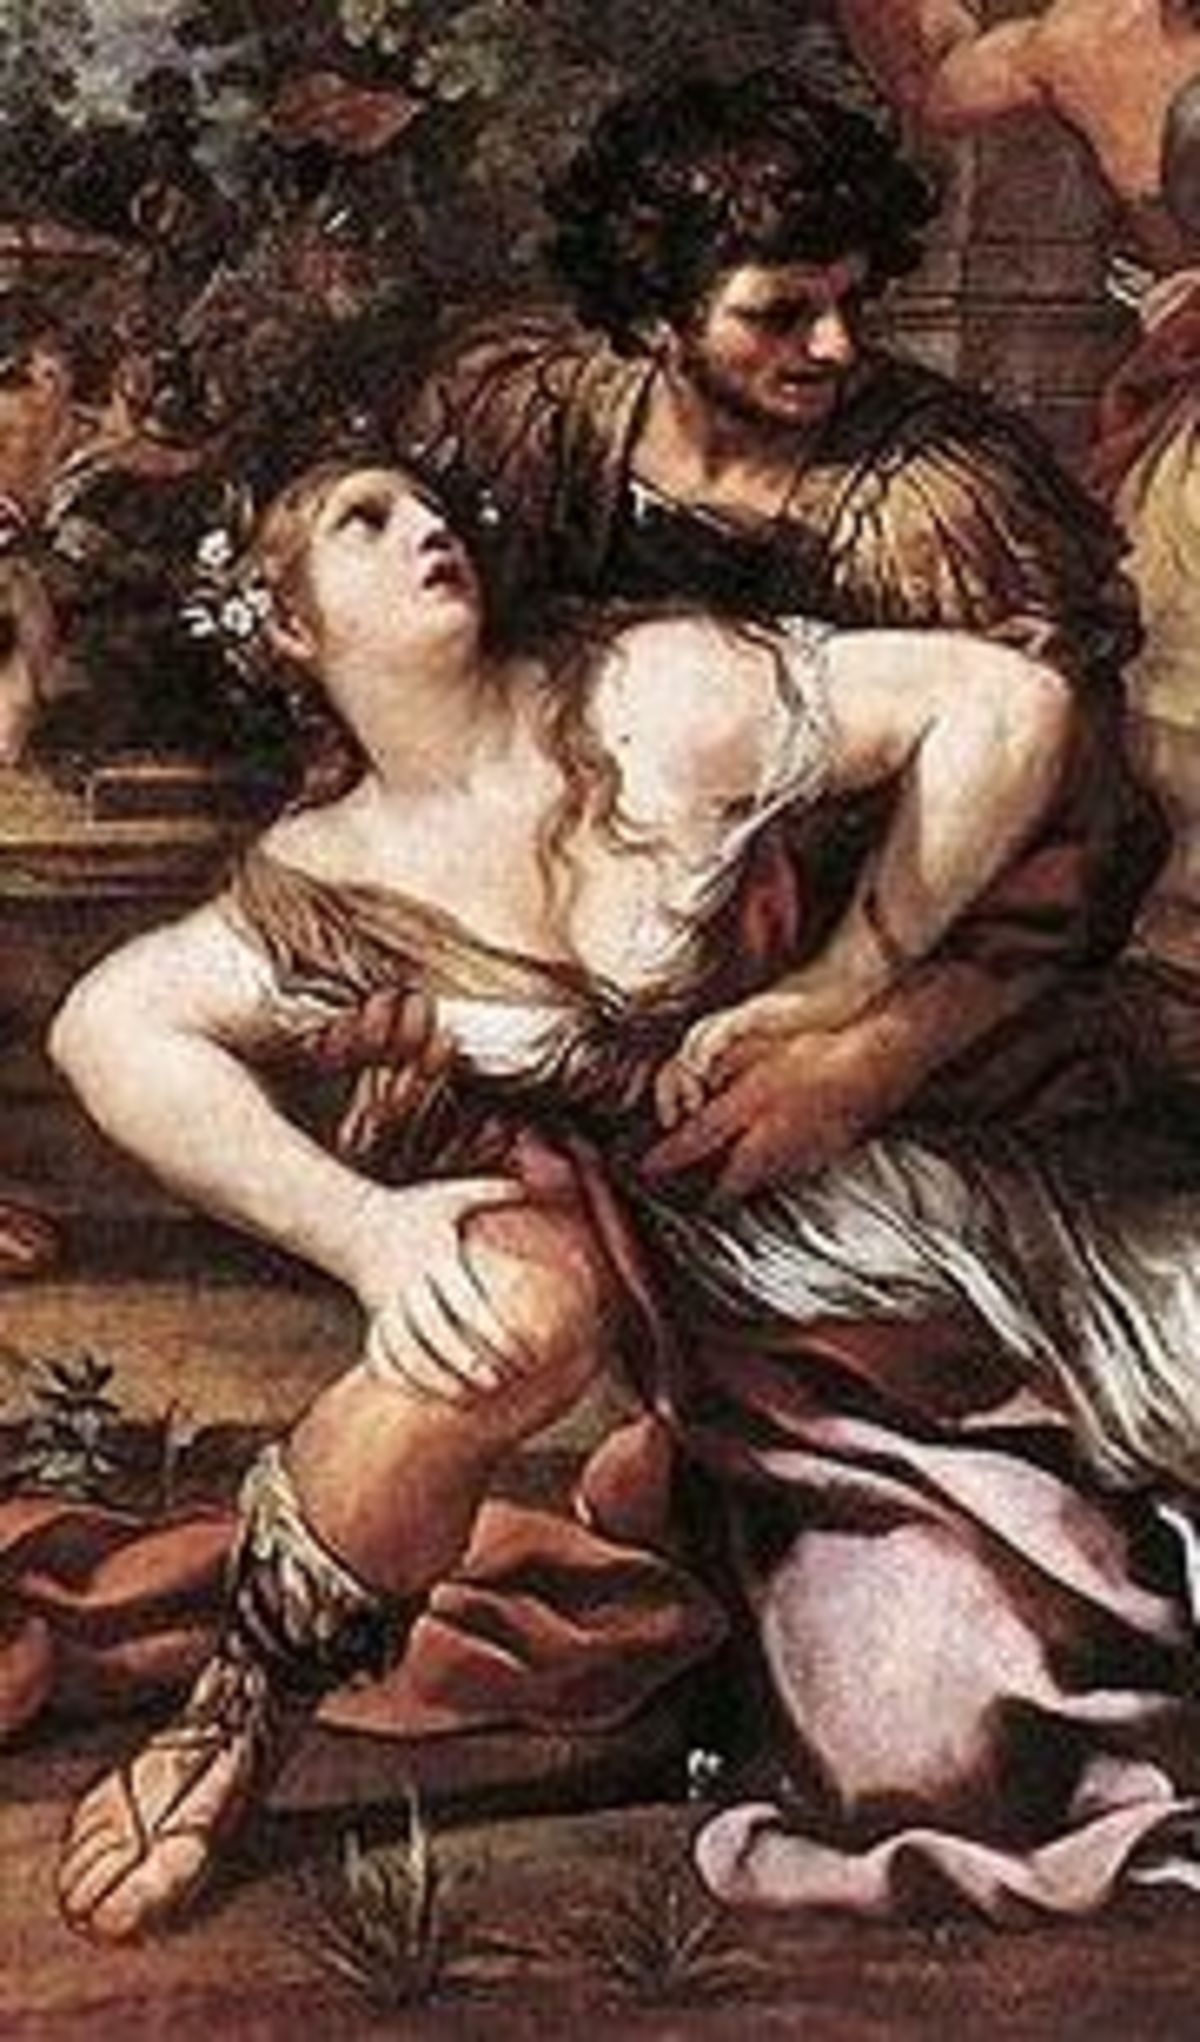 Consensual Forced Sex Fantasy - The Rape Fantasy | Psychology Today